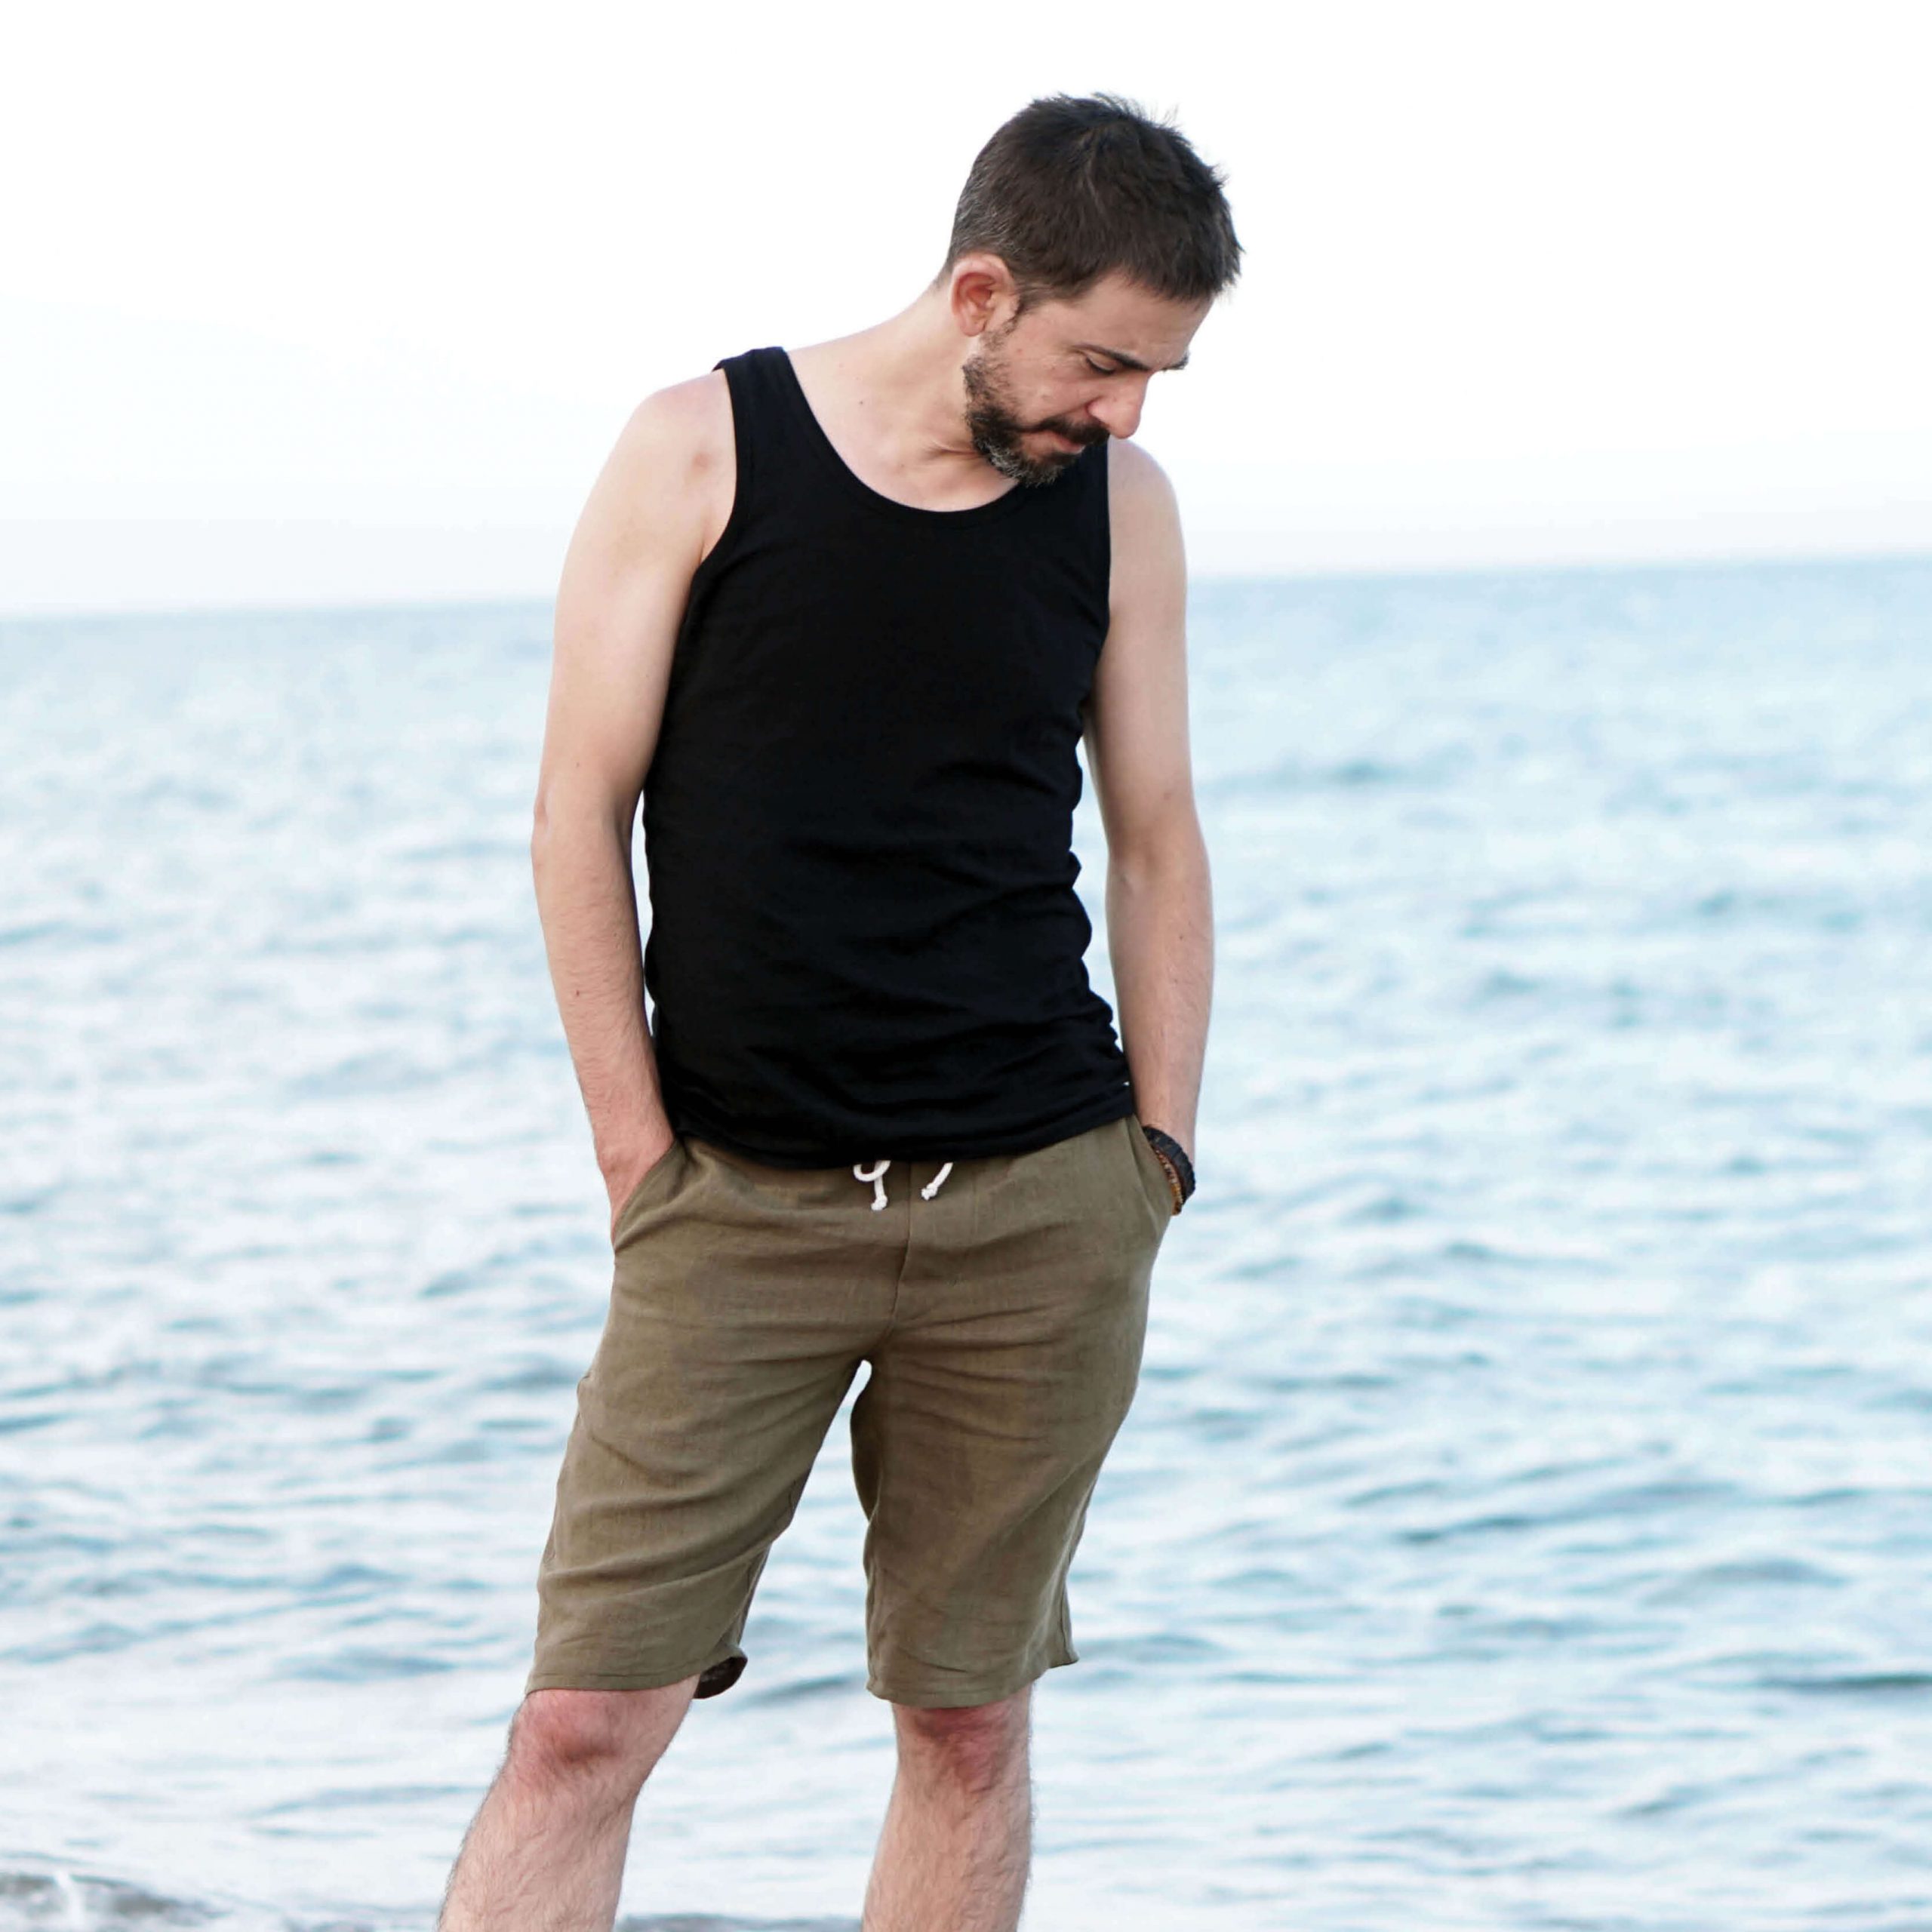 Man wearing the Men's Tank Top sewing pattern from Wardrobe by Me on The Fold Line. A vest top pattern made in jersey fabric with lycra or stretchy rib fabrics, featuring a straight fitted body, longer length, neckline and armscye binding.